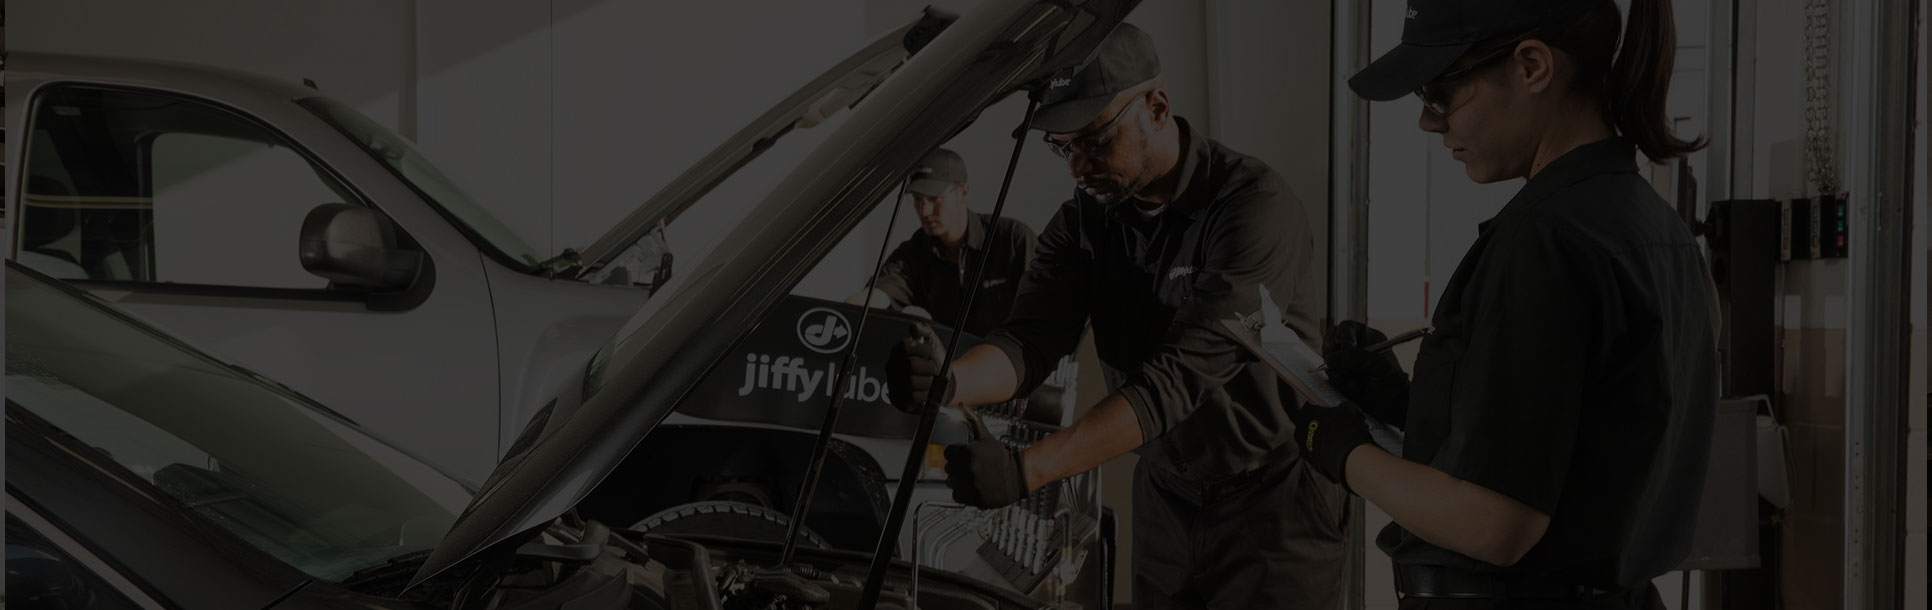 State Vehicle Inspections and Emissions Testing - Vehicle Inspections and Diagnostics Near Me - Jiffy Lube Auto Services